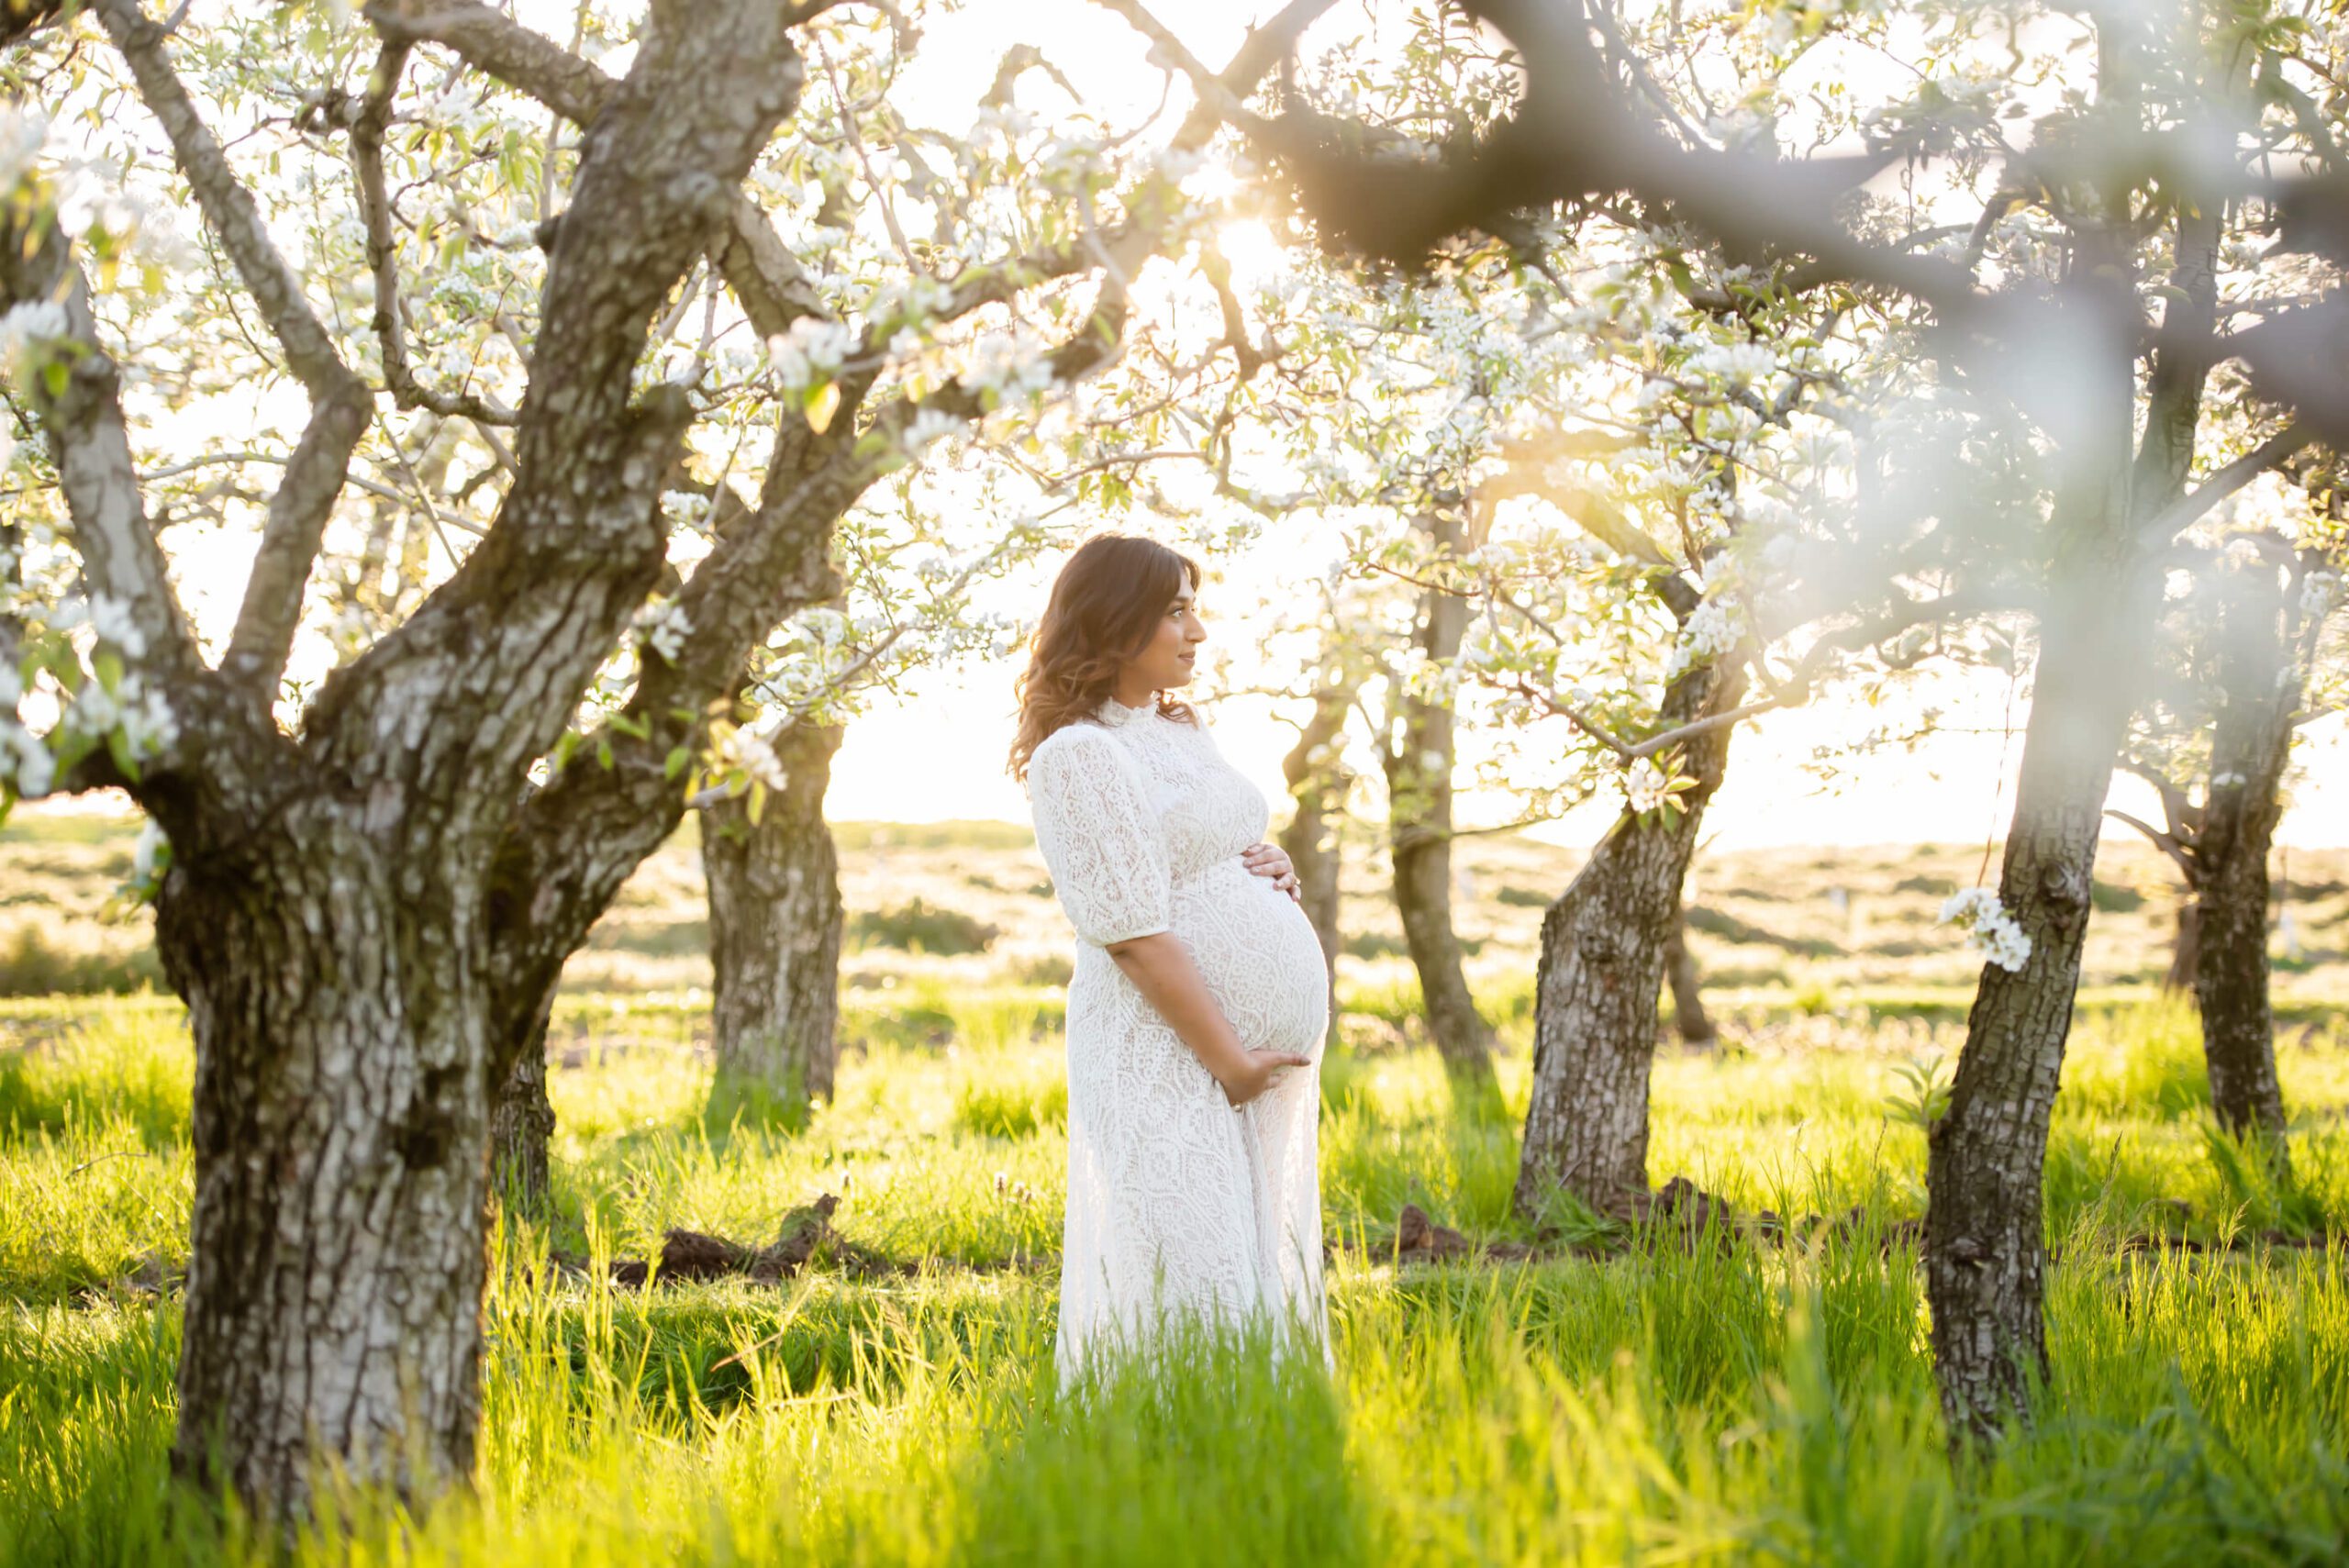 cherry blossom sunset maternity photography session